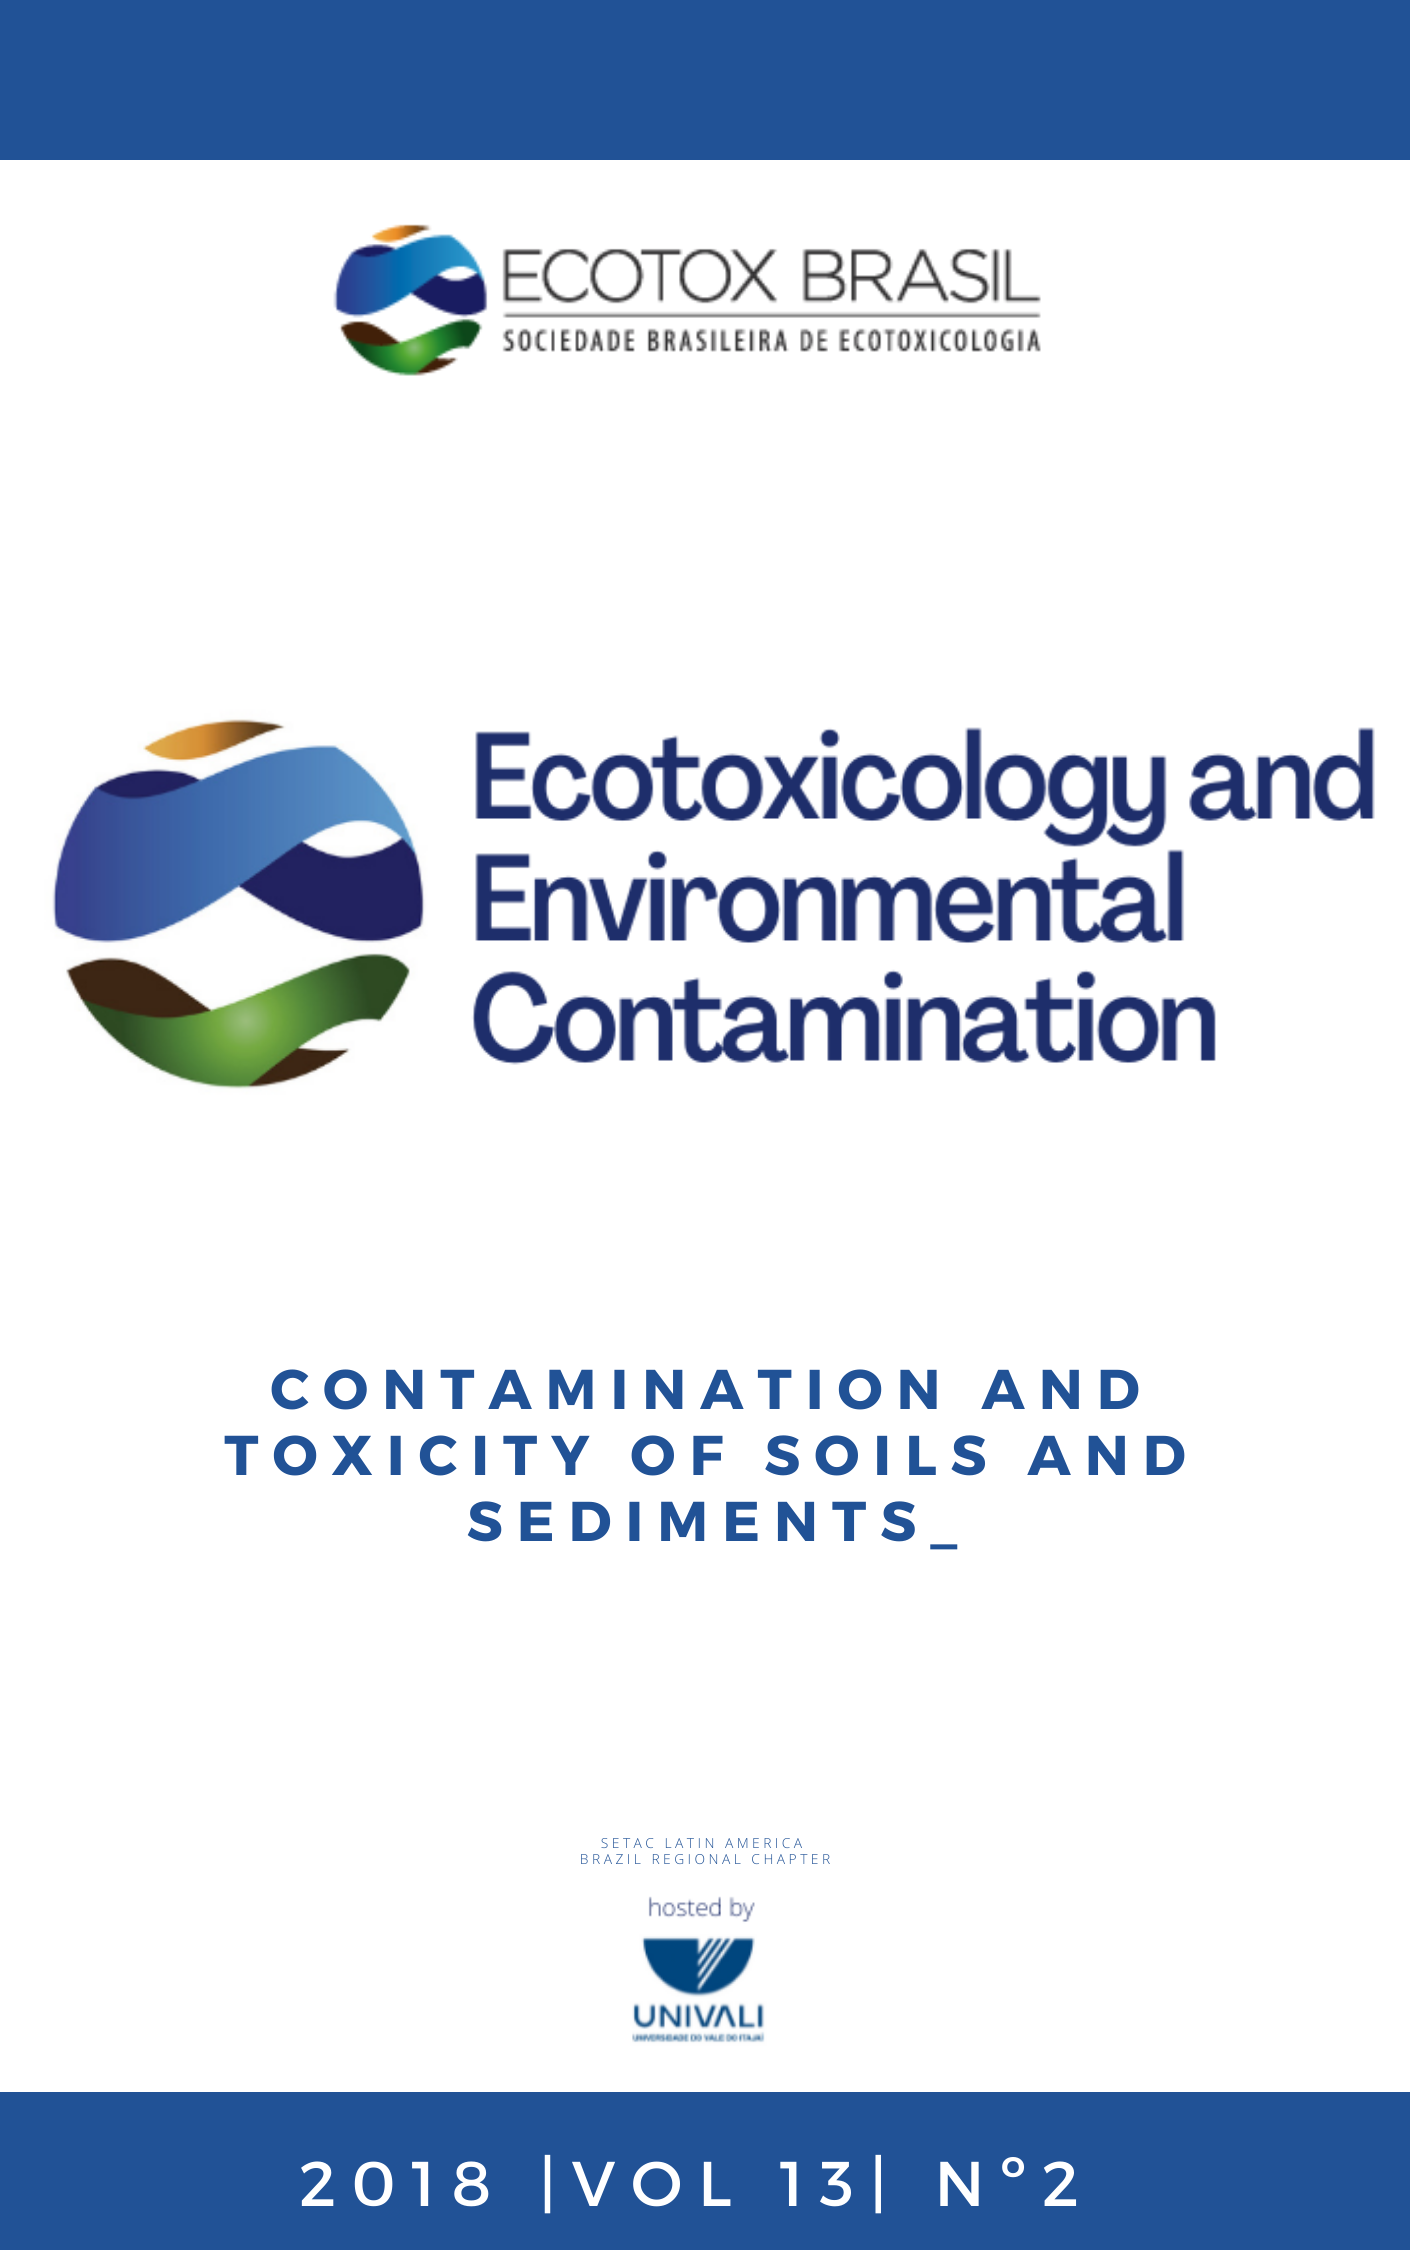 					View Vol. 13 No. 2 (2018): Contamination and Toxicity of Soils and Sediments
				